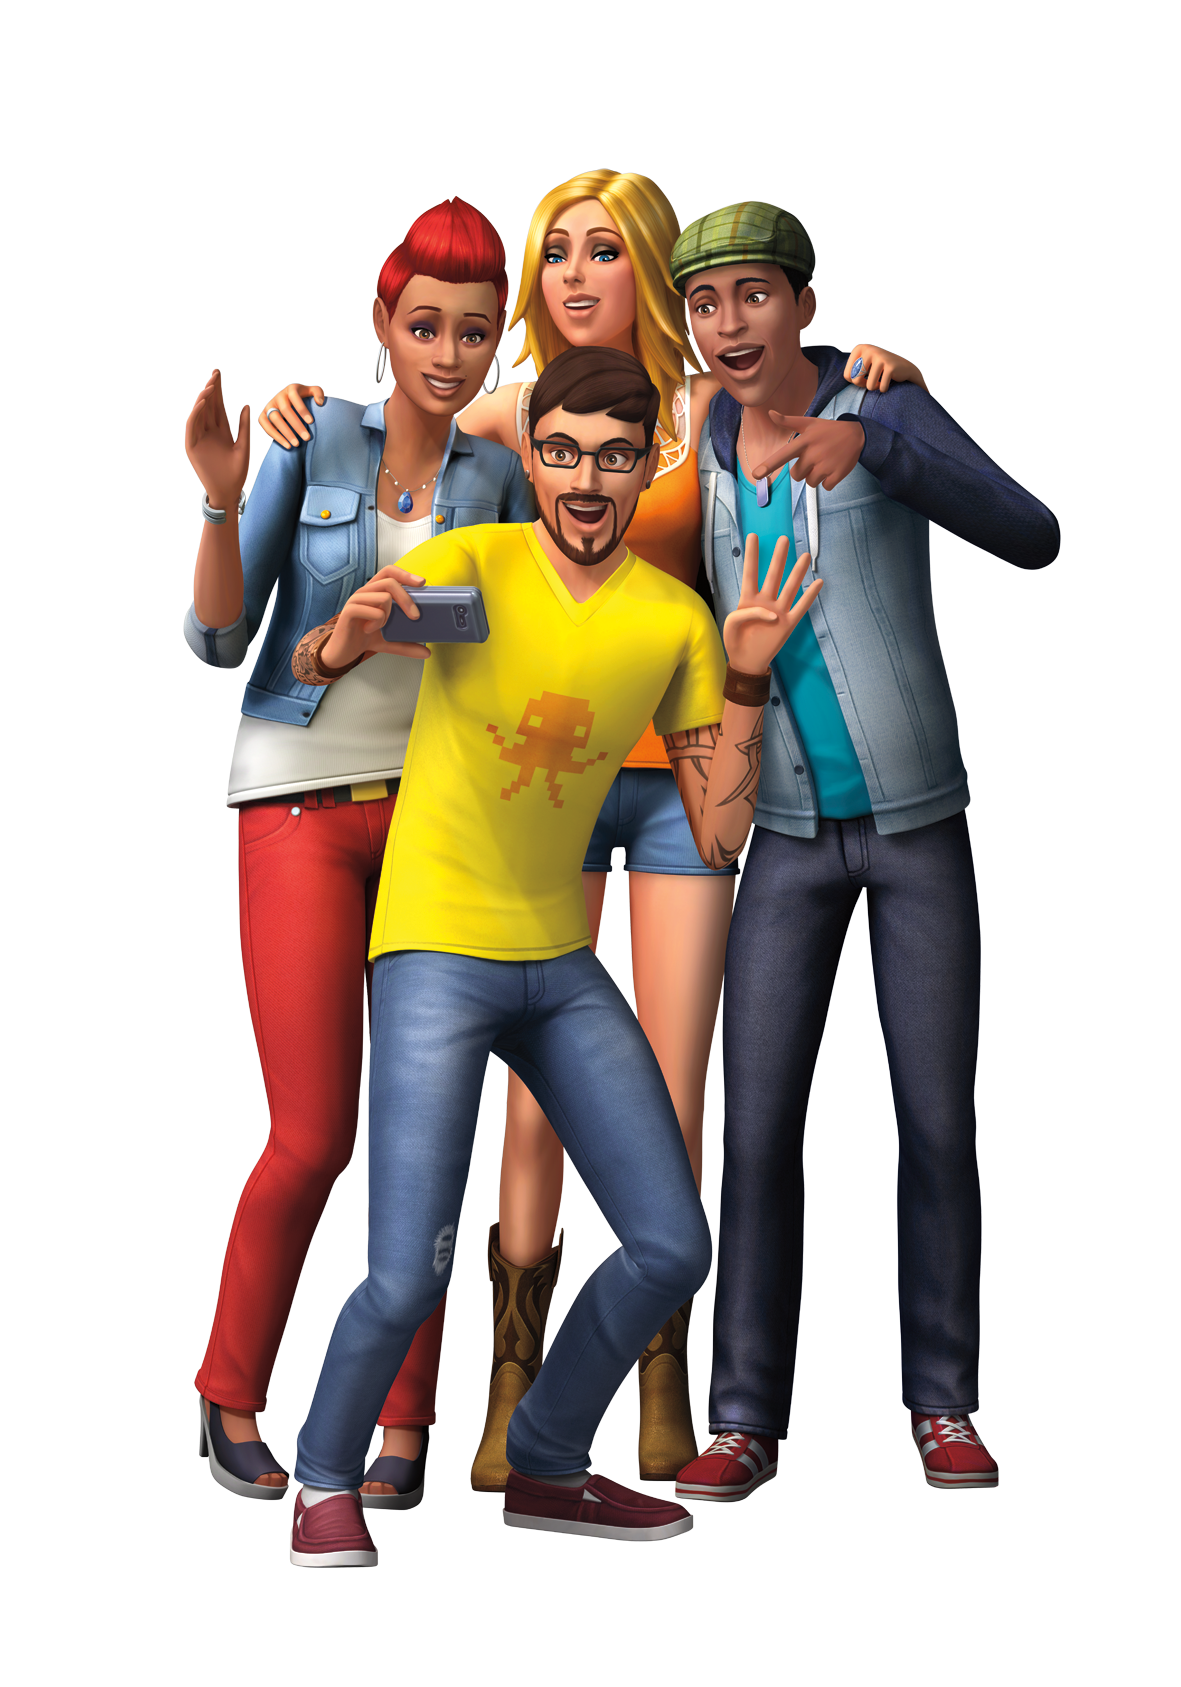 The Sims PNG Transparent